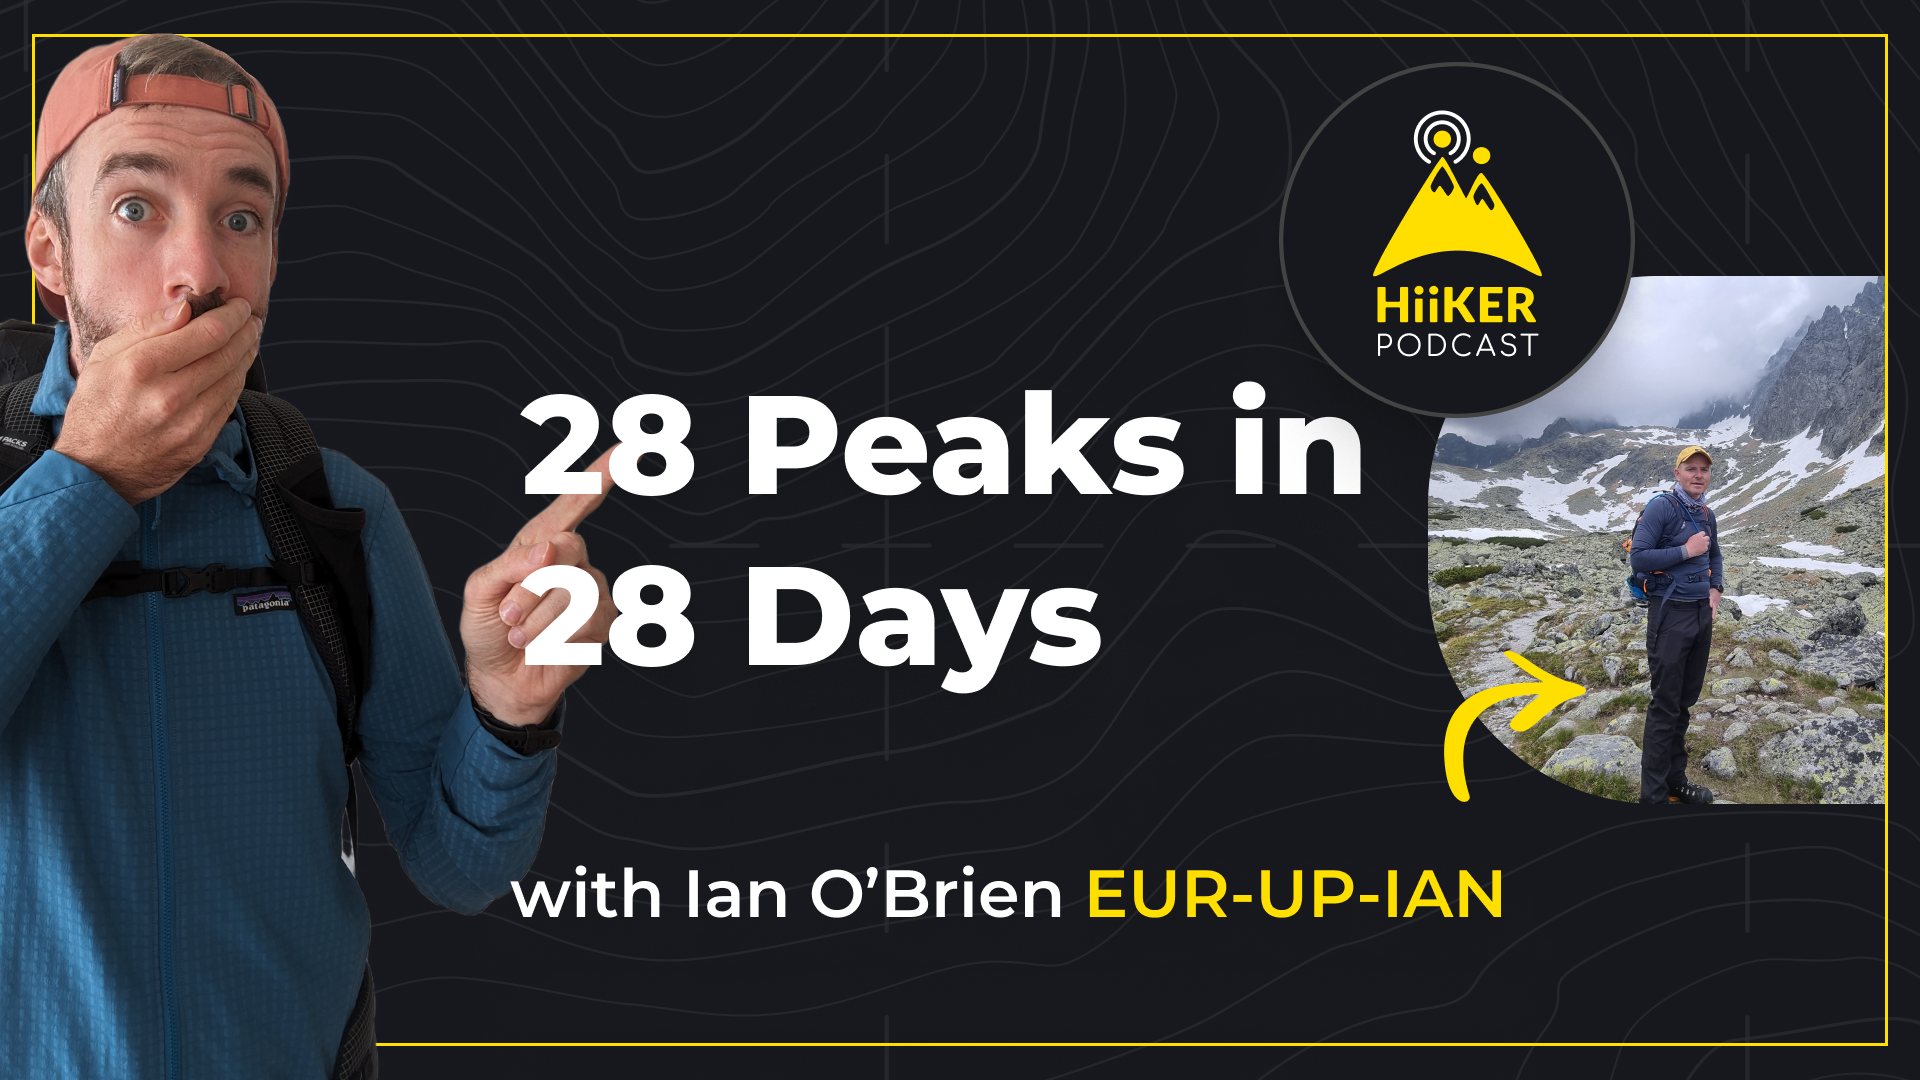 Climbing 28 Peaks in 28 days with Parkinson’s Disease – Ian O’Brien – The HiiKER Podcast